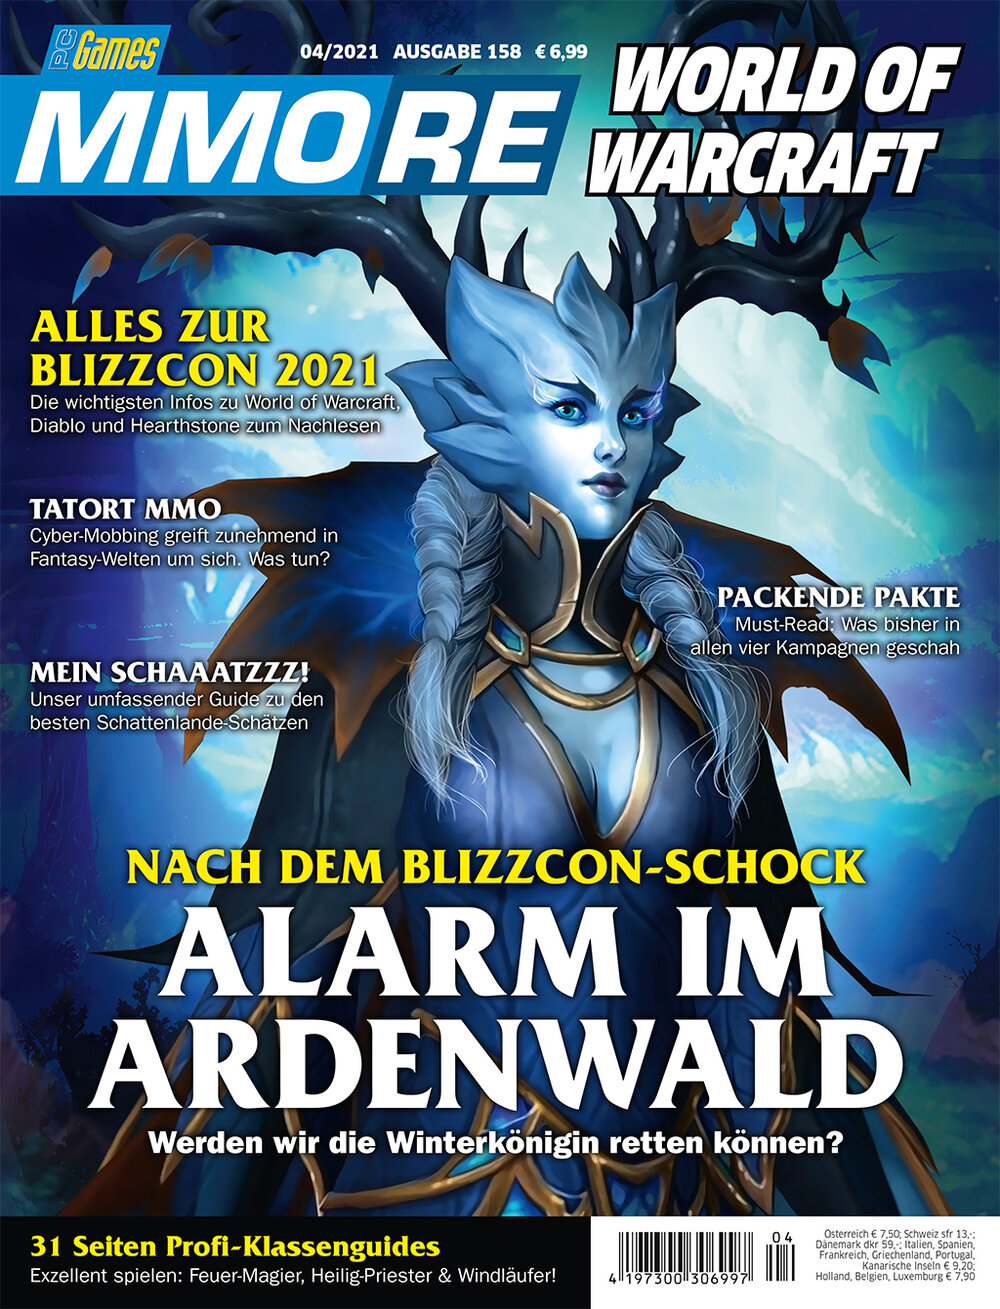 PC Games MMORE ePaper 04/2021